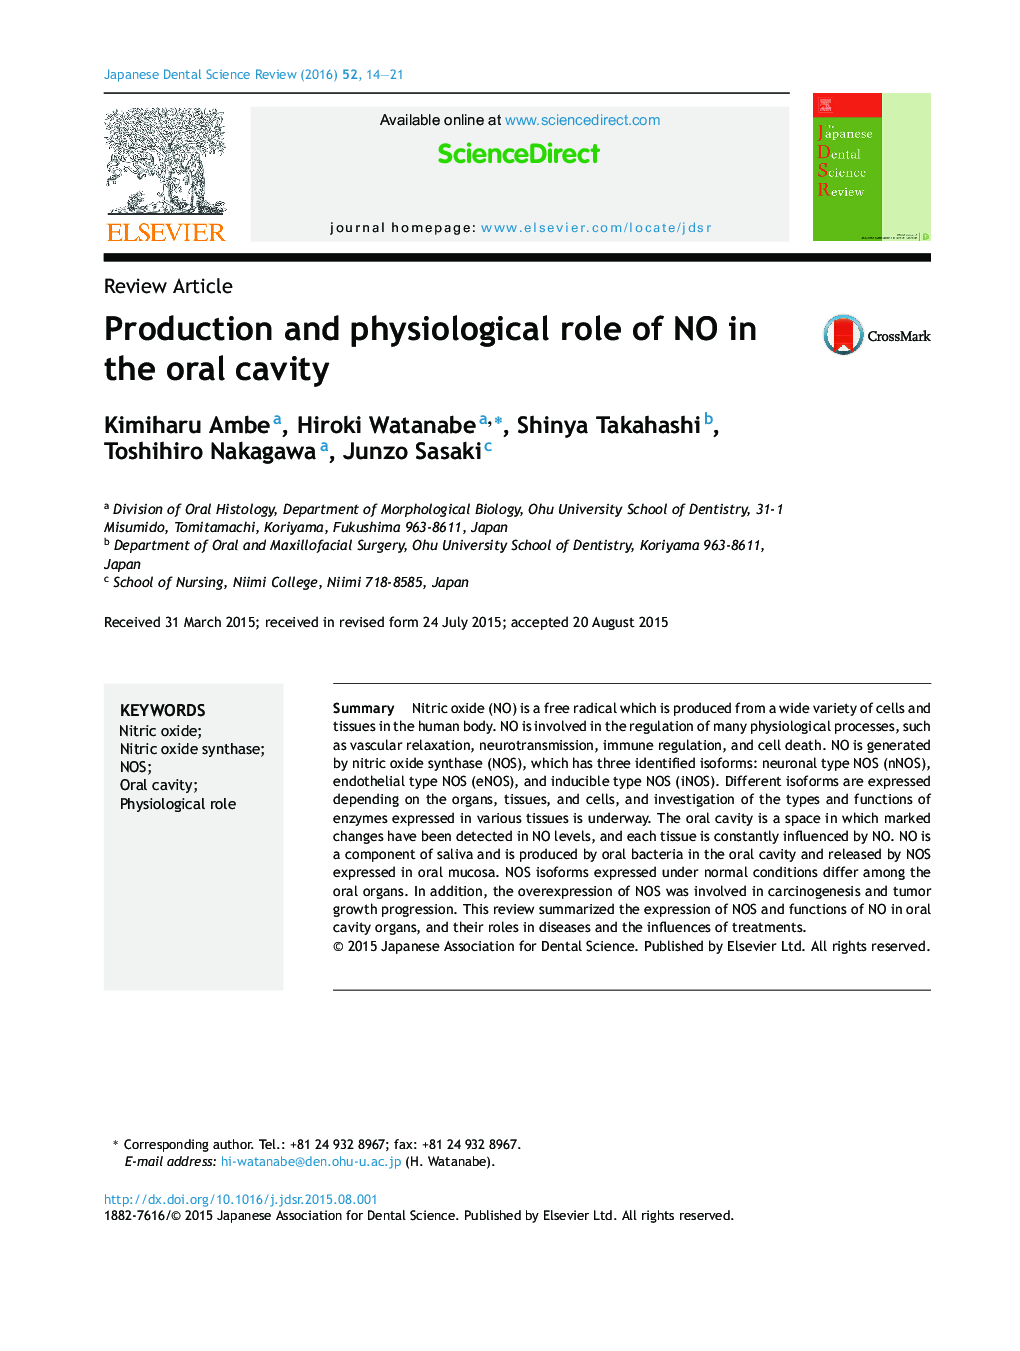 Production and physiological role of NO in the oral cavity